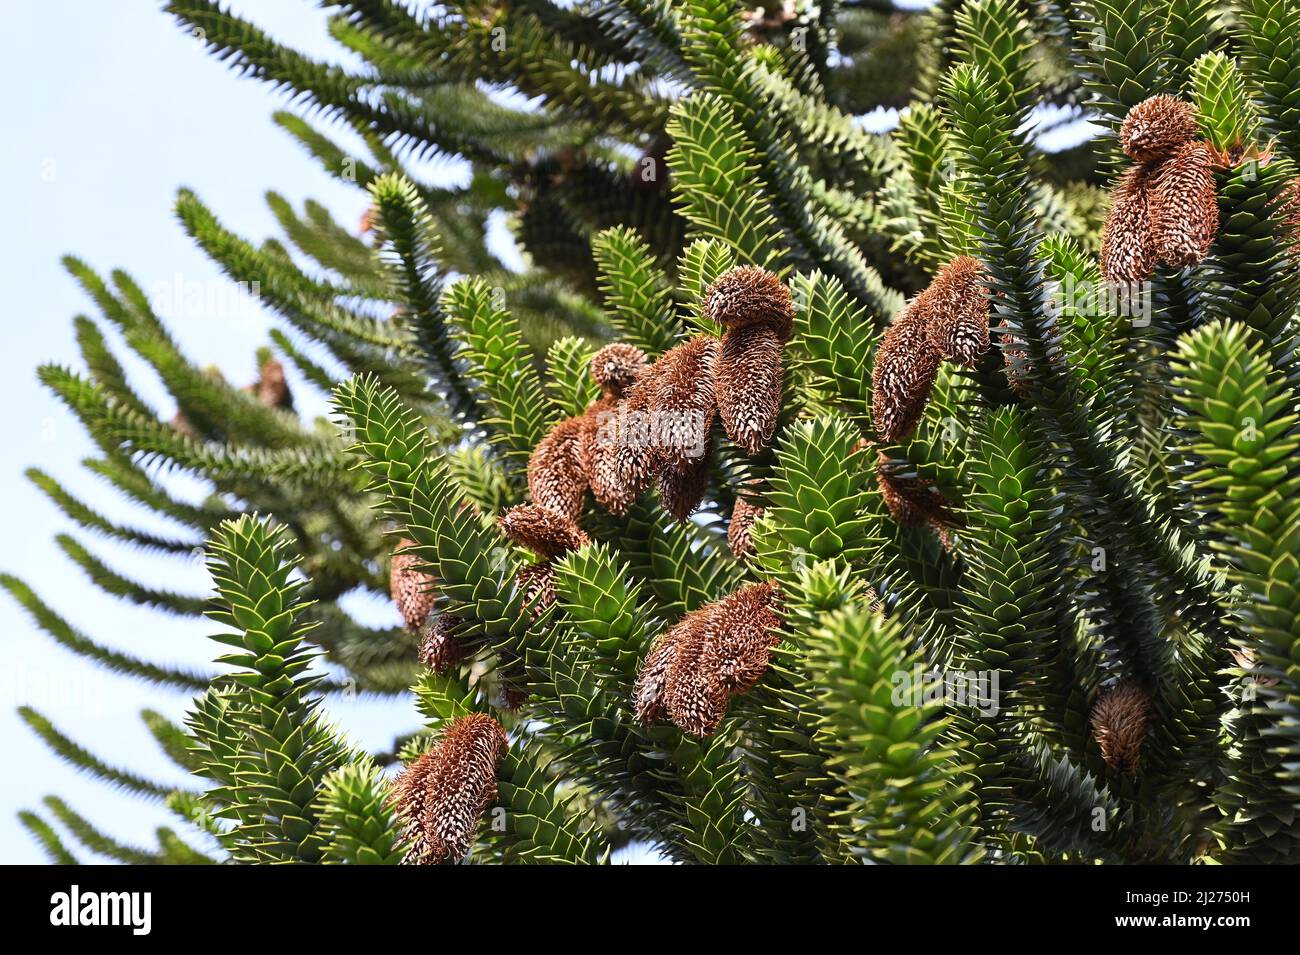 Monkey Puzzle tree, Araucaria araucana, cones at the end of the branches Stock Photo